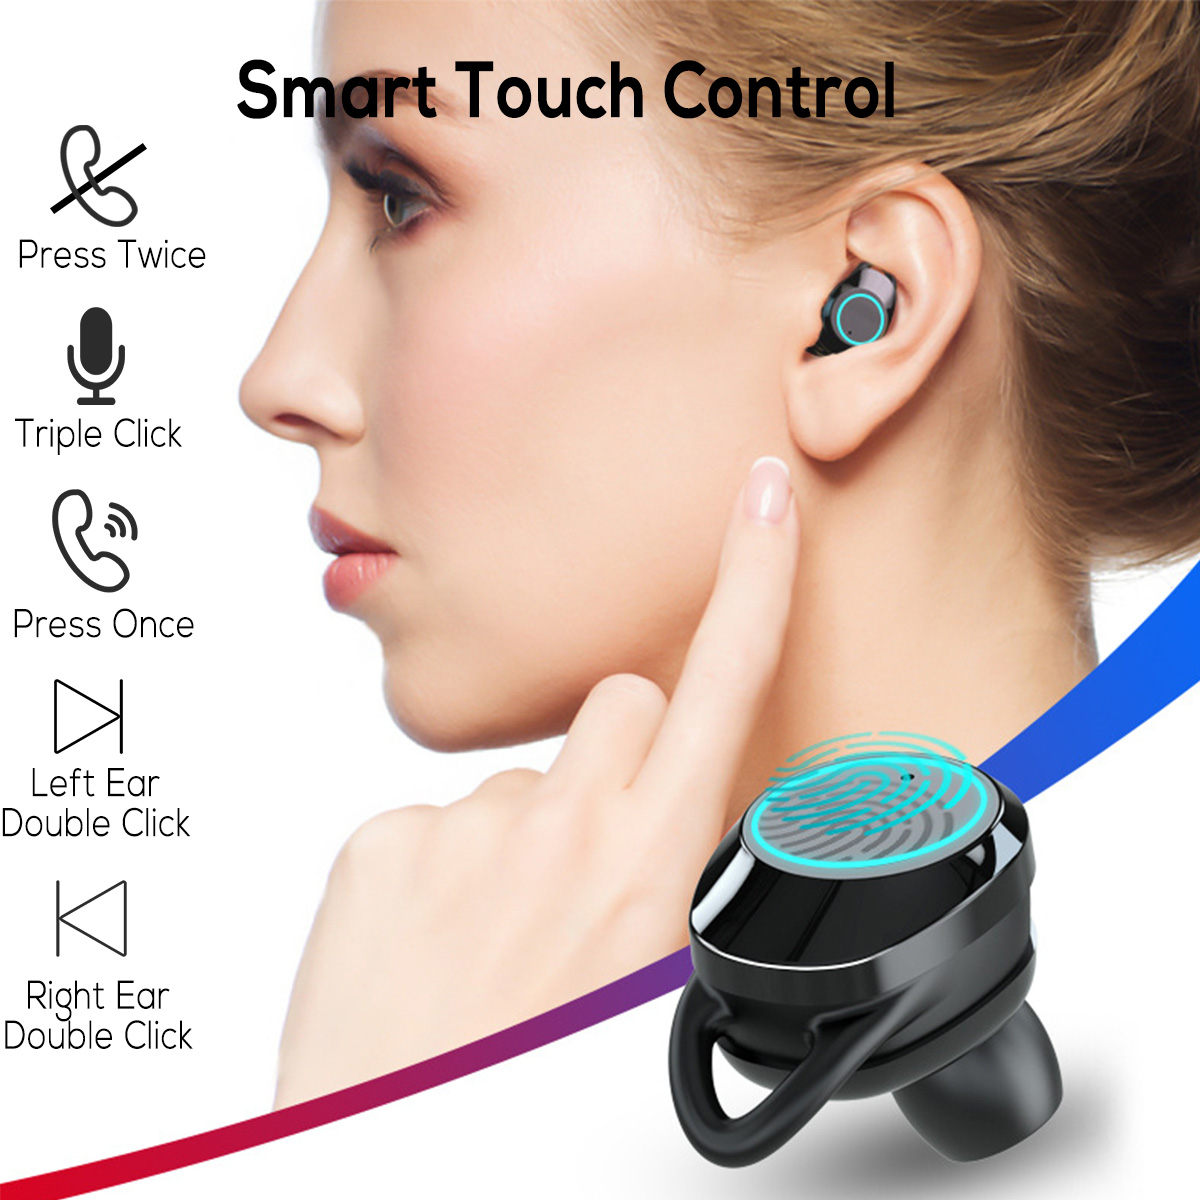 bluetooth-50-Mini-TWS-Earbuds-Smart-Touch-Bilateral-Call-IPX6-Waterproof-Earphone-with-1000mAh-Charg-1439770-7